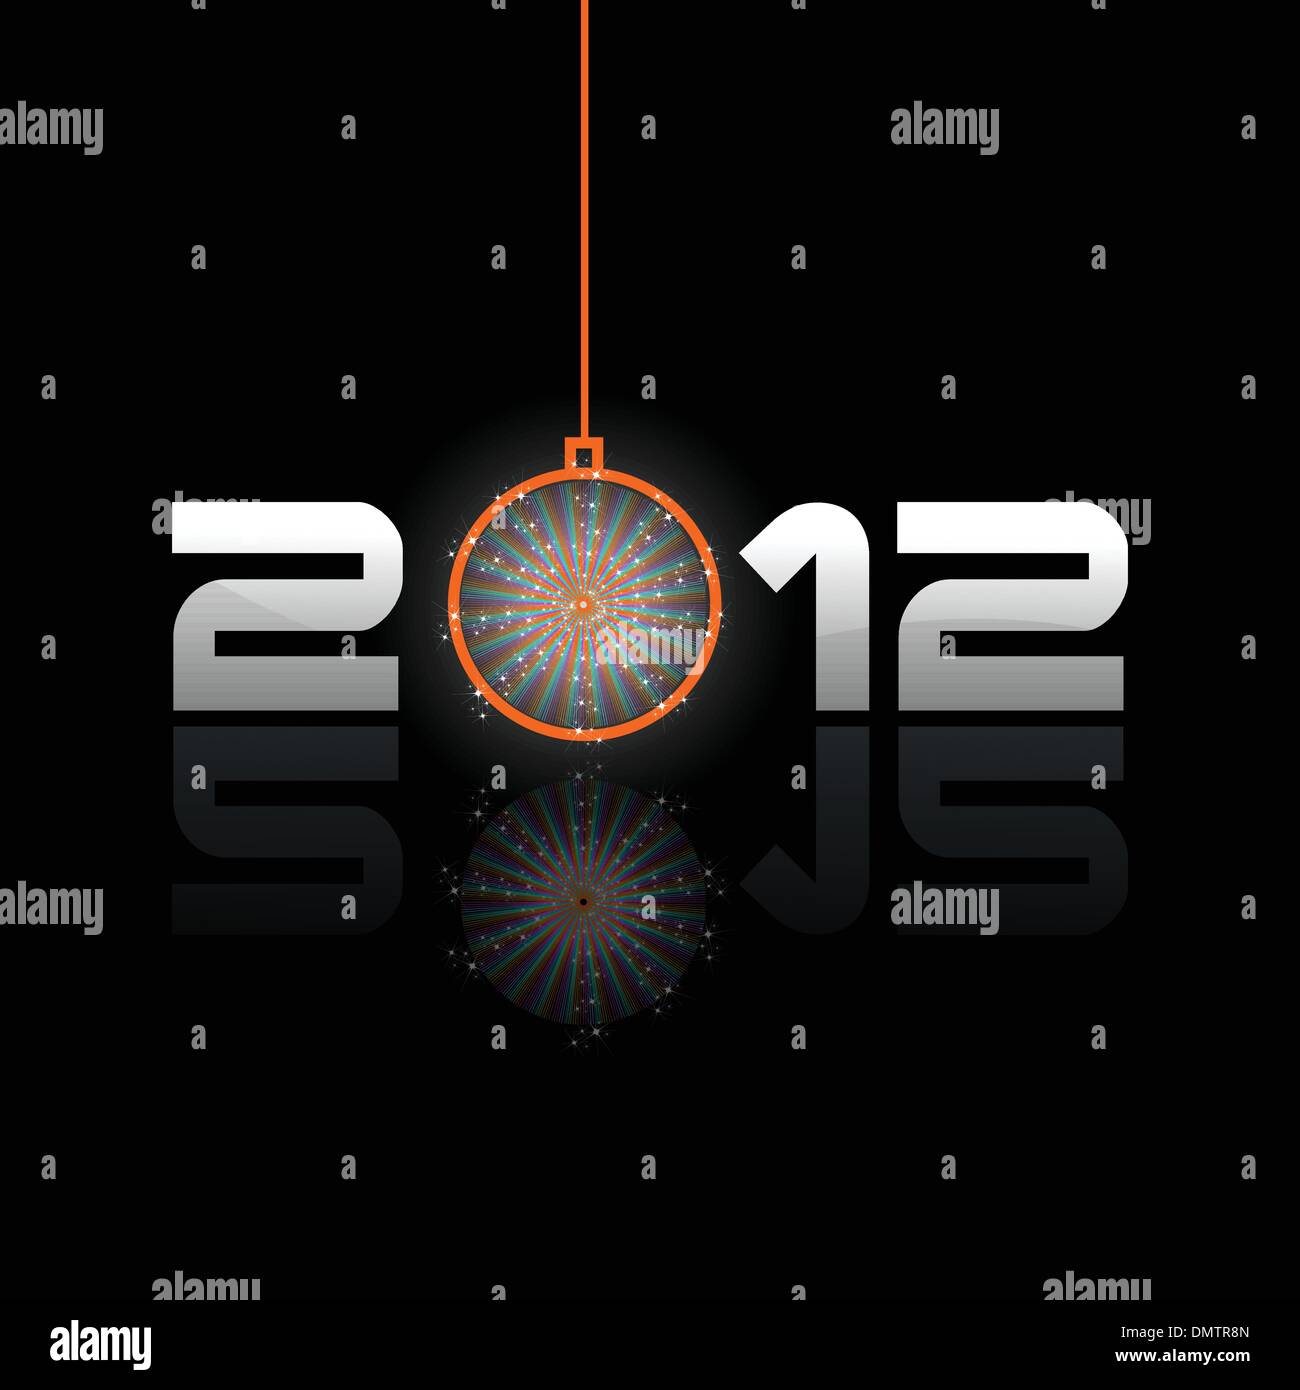 2012 vector new year's eve greeting card with hanging balls. Stock Vector